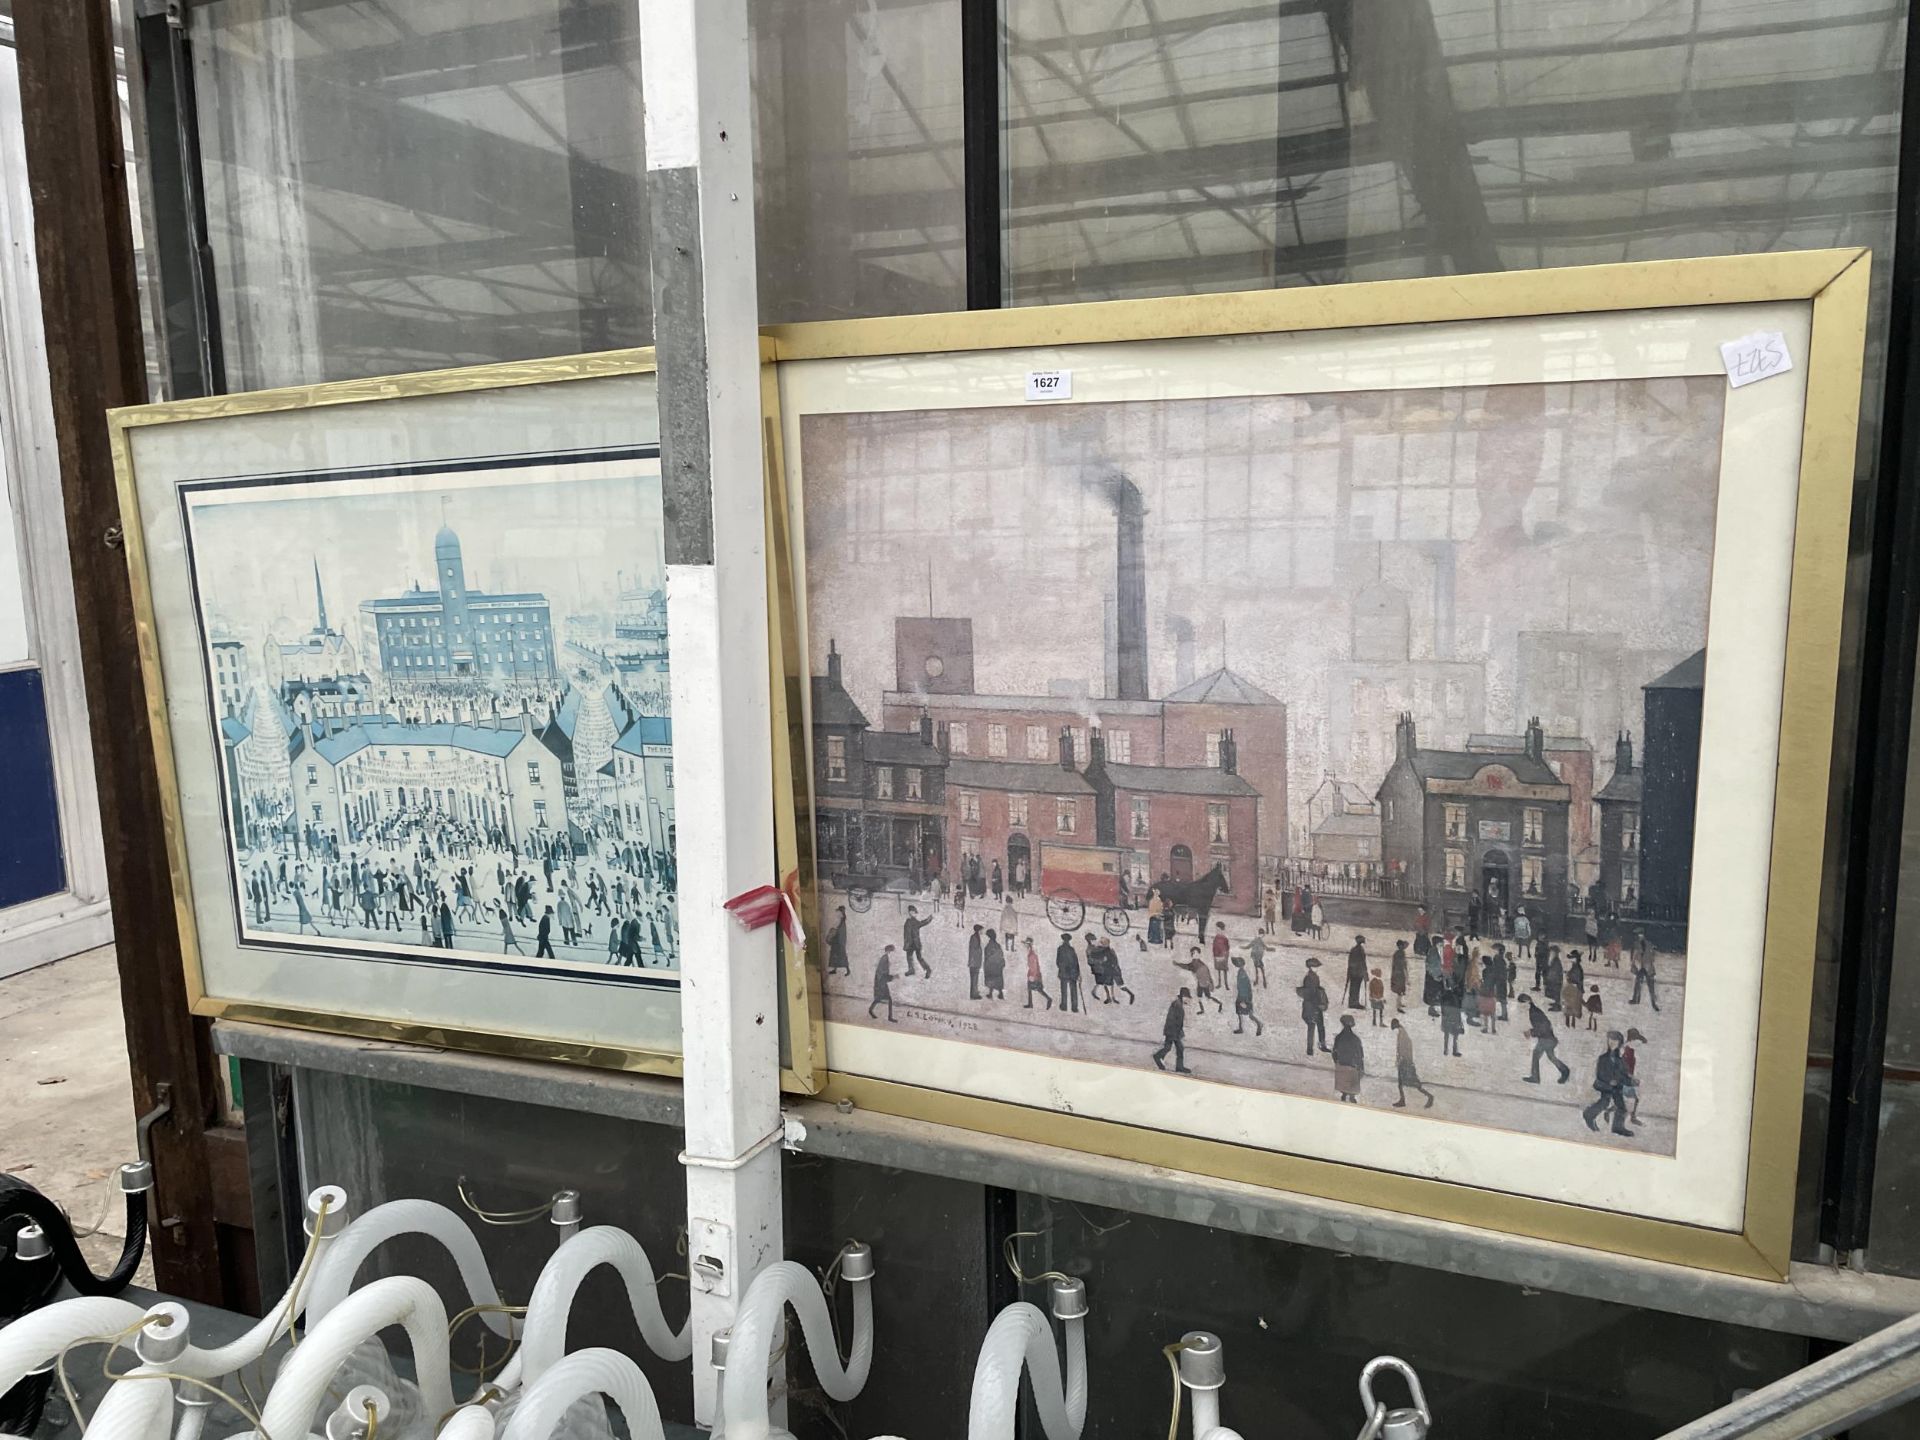 TWO LARGE FRAMED LOWRY PRINTS